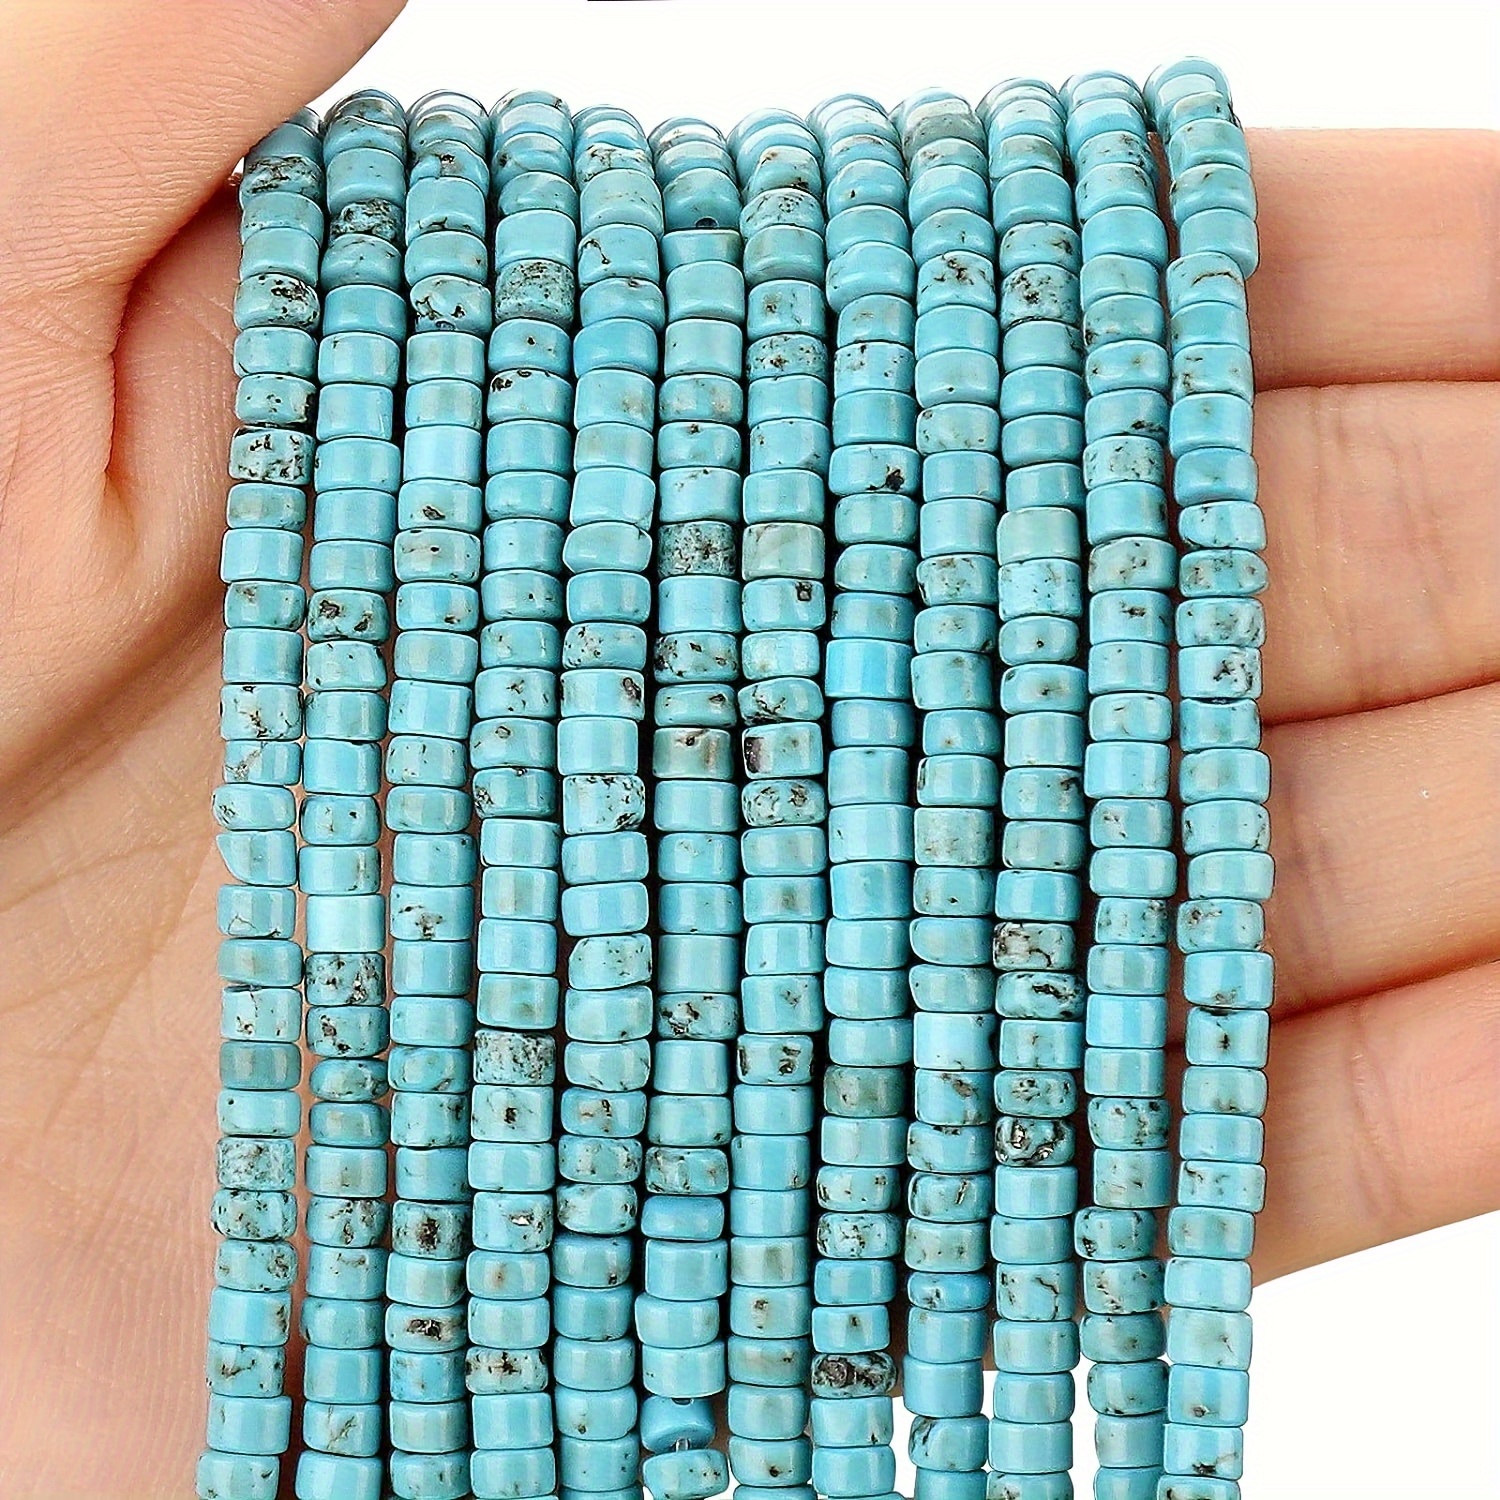 

170pcs Natural Blue Turquoise Loose Spacer Flat Round Disc Stone Beads For Diy Beading Special Bracelet Necklace Jewelry Making Craft Supplies 4mm*2mm 38cm